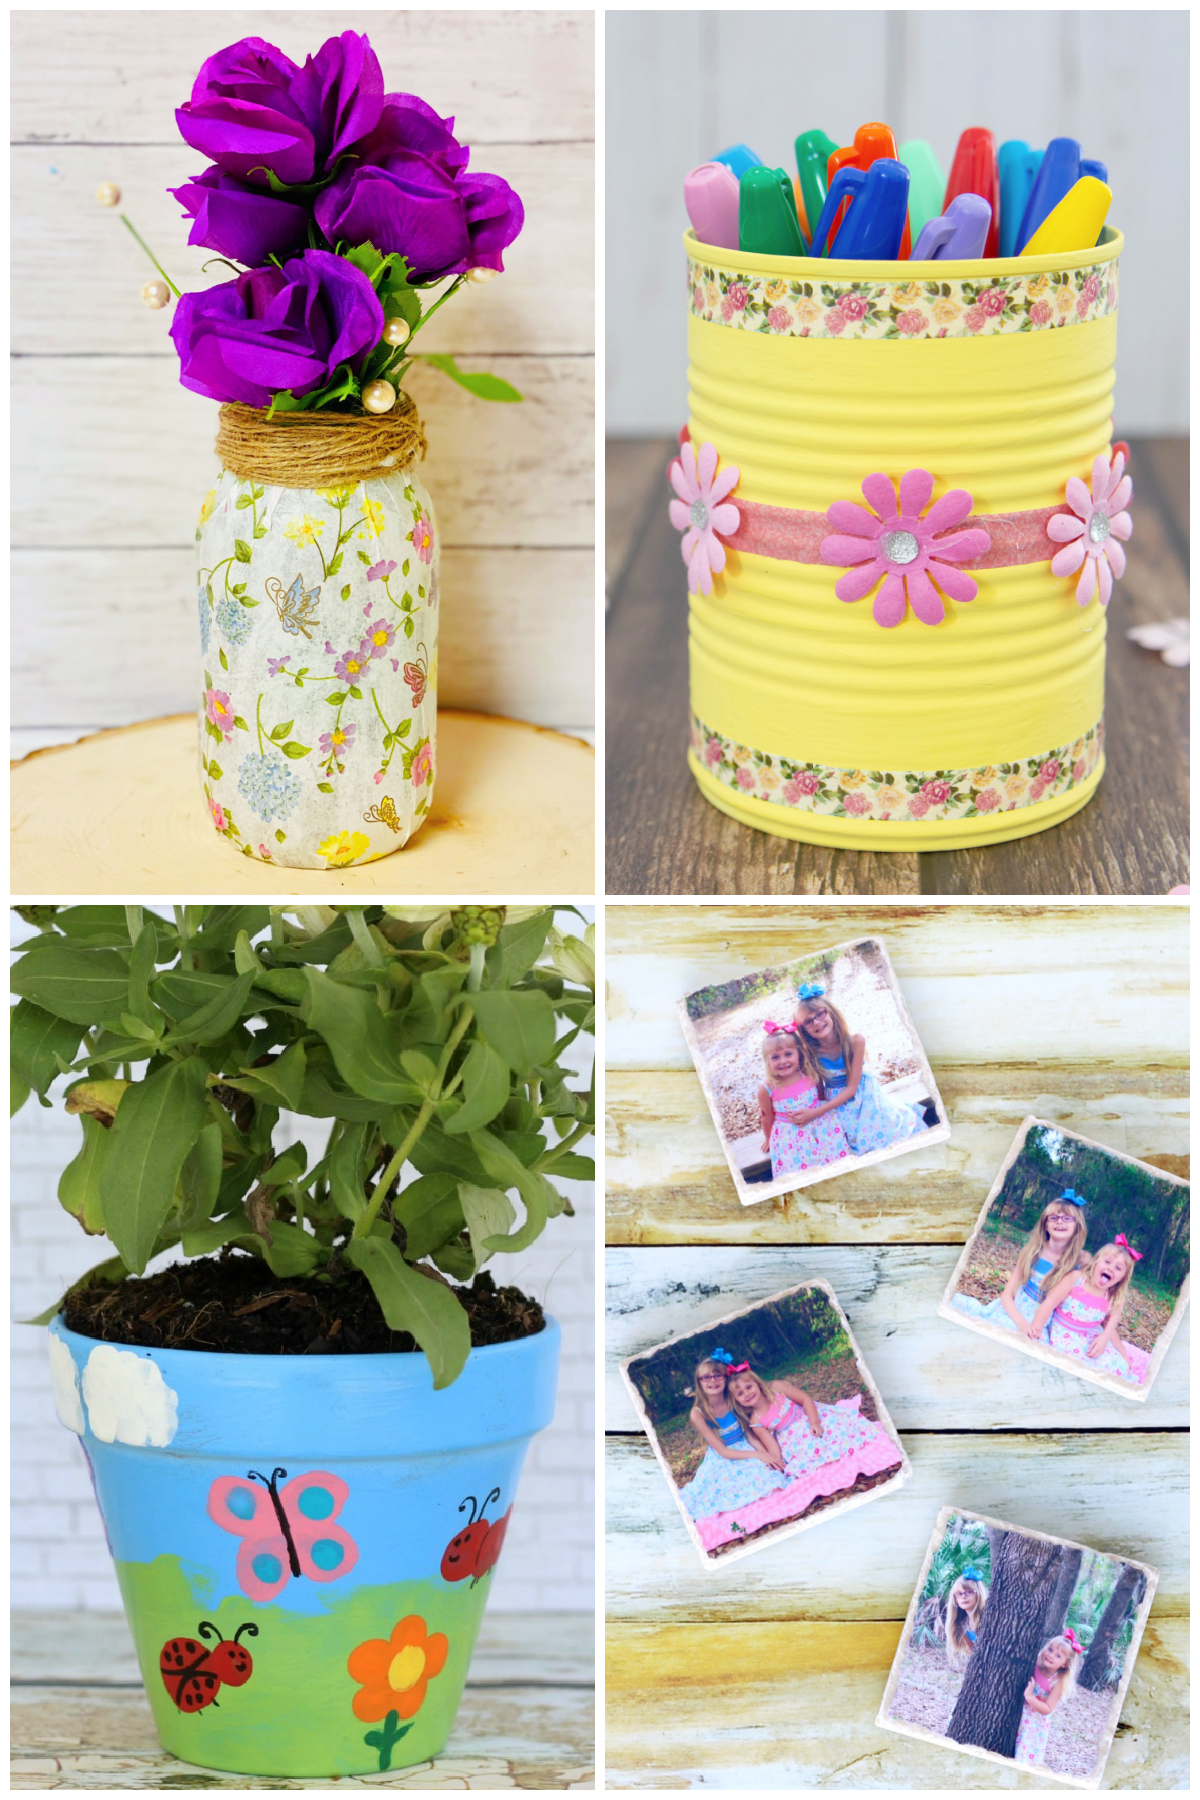 Four diy craft projects: a flower vase made from a decorated jar, a pen holder from a recycled can, a painted plant pot, and personalized photo coasters.